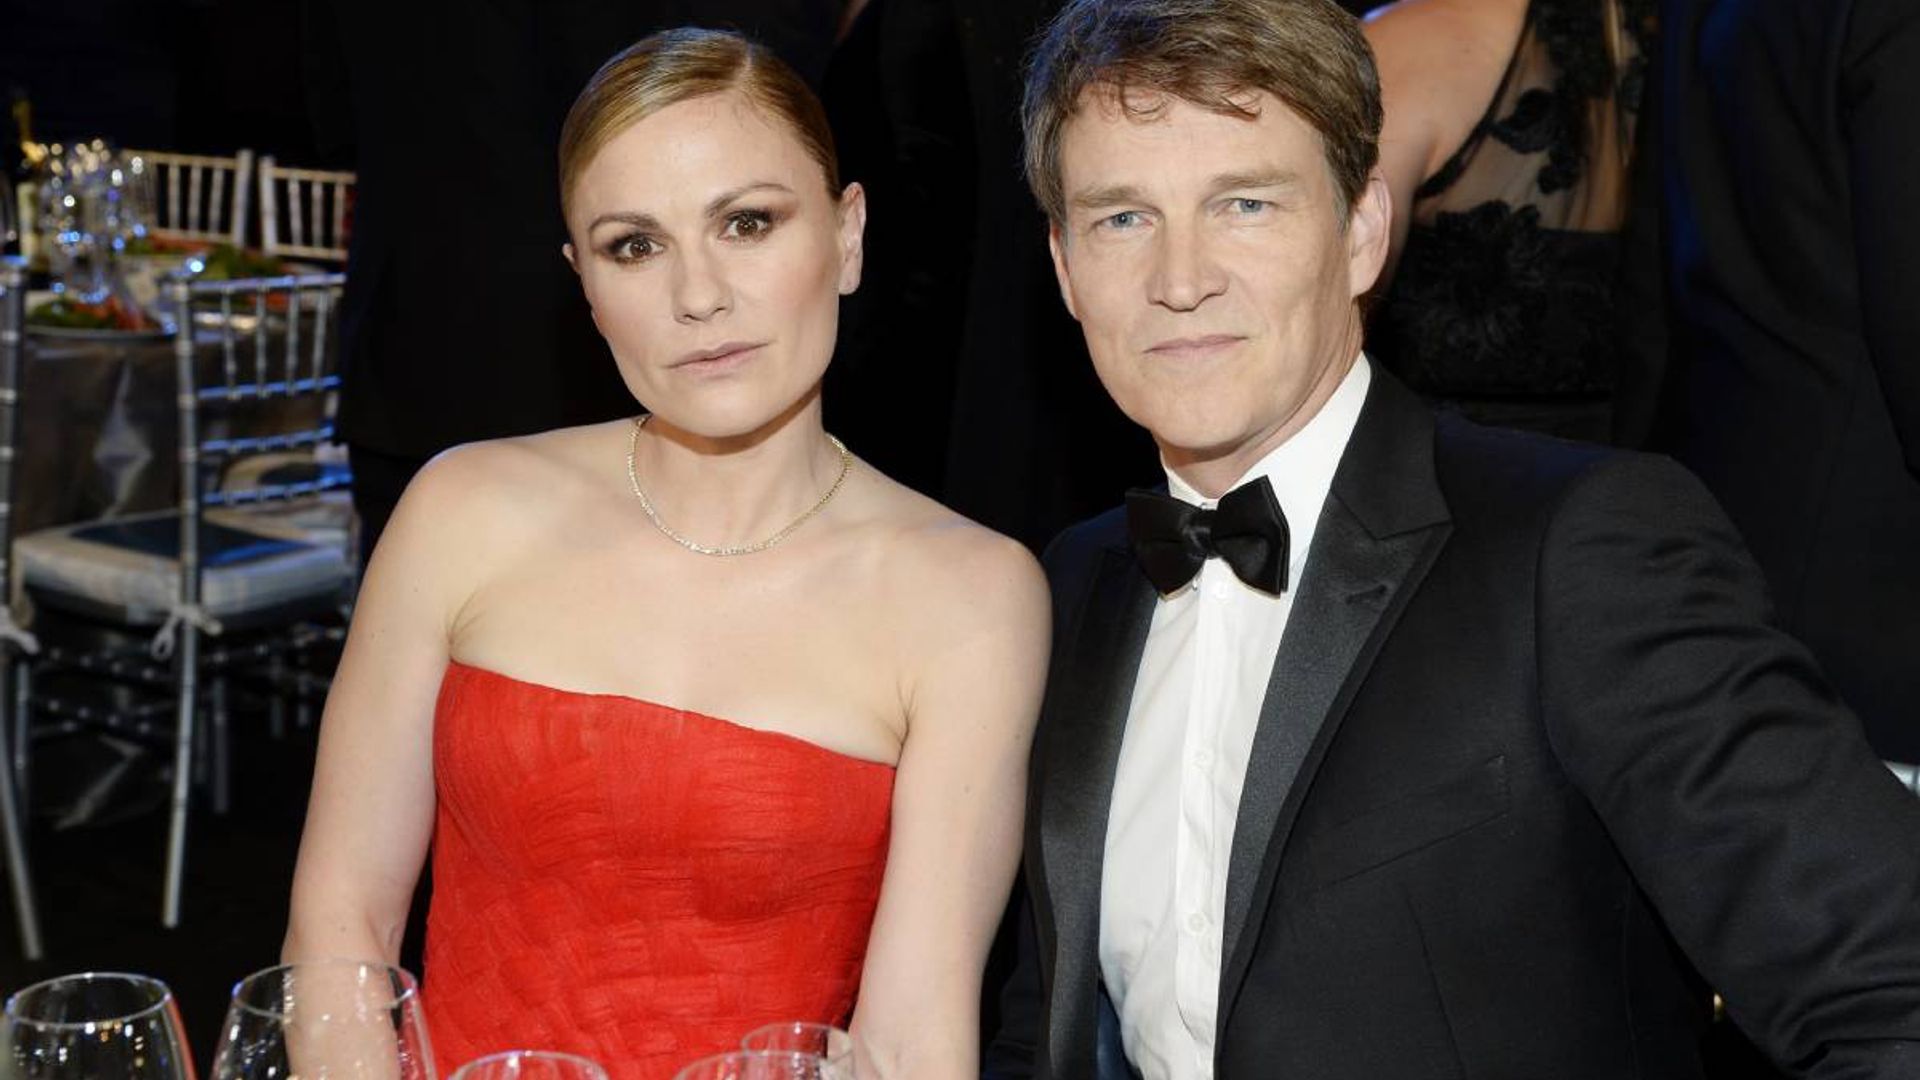 True Blood star Anna Paquin leaves shocked with rare glimpse inside family home | HELLO!